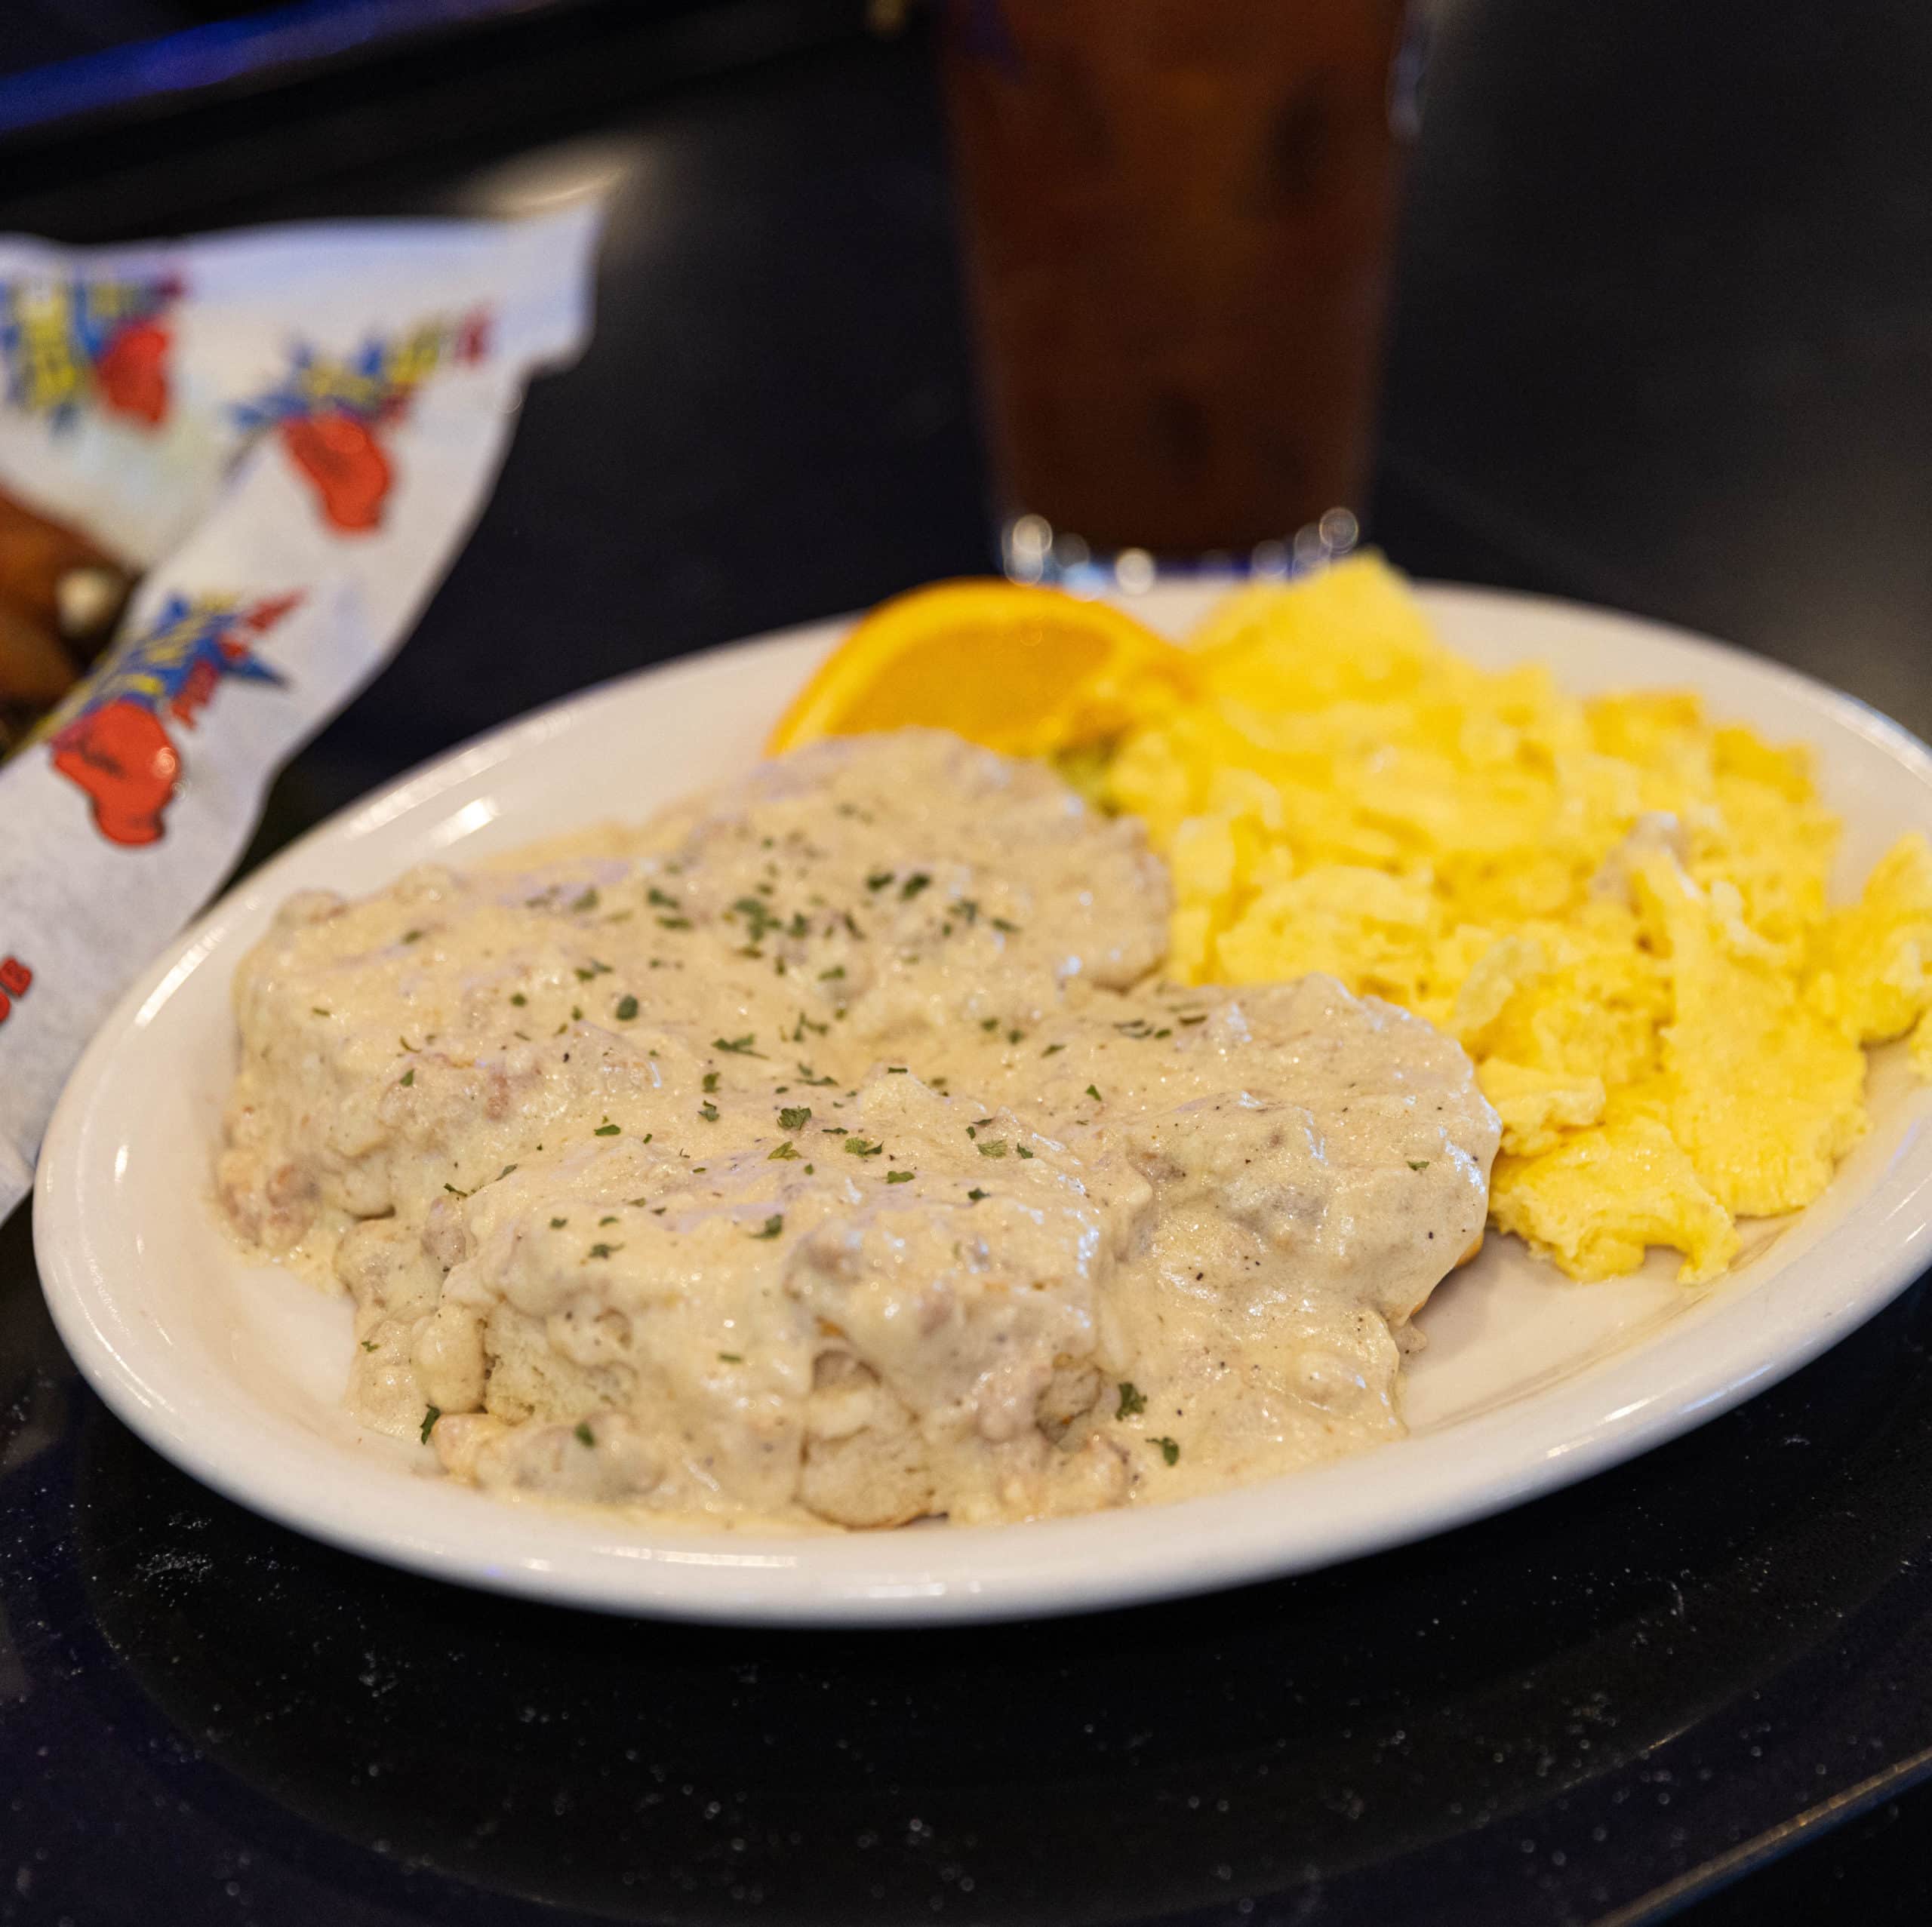 Biscuits topped our our house made sausage gravy. Served with two eggs any style.